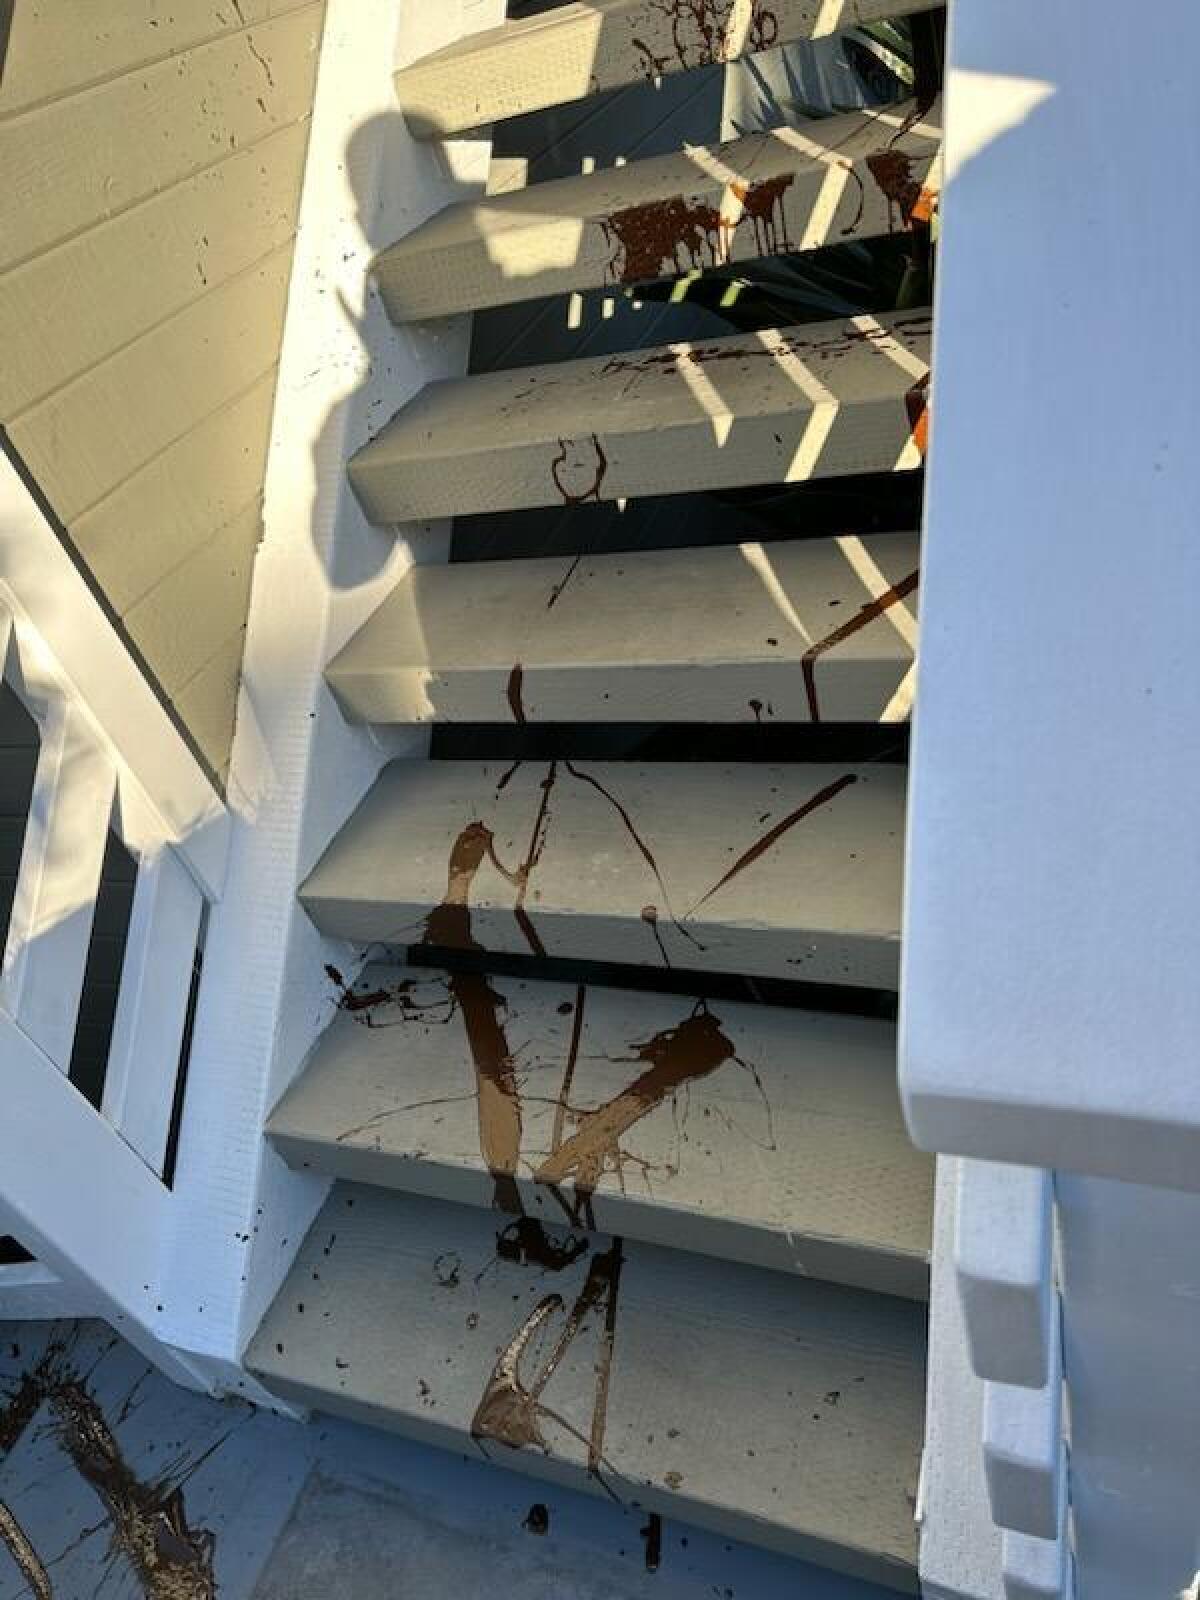 Sewage or feces was strewn over the stairs to Laguna Beach City Manager Shohreh Dupuis' residence.